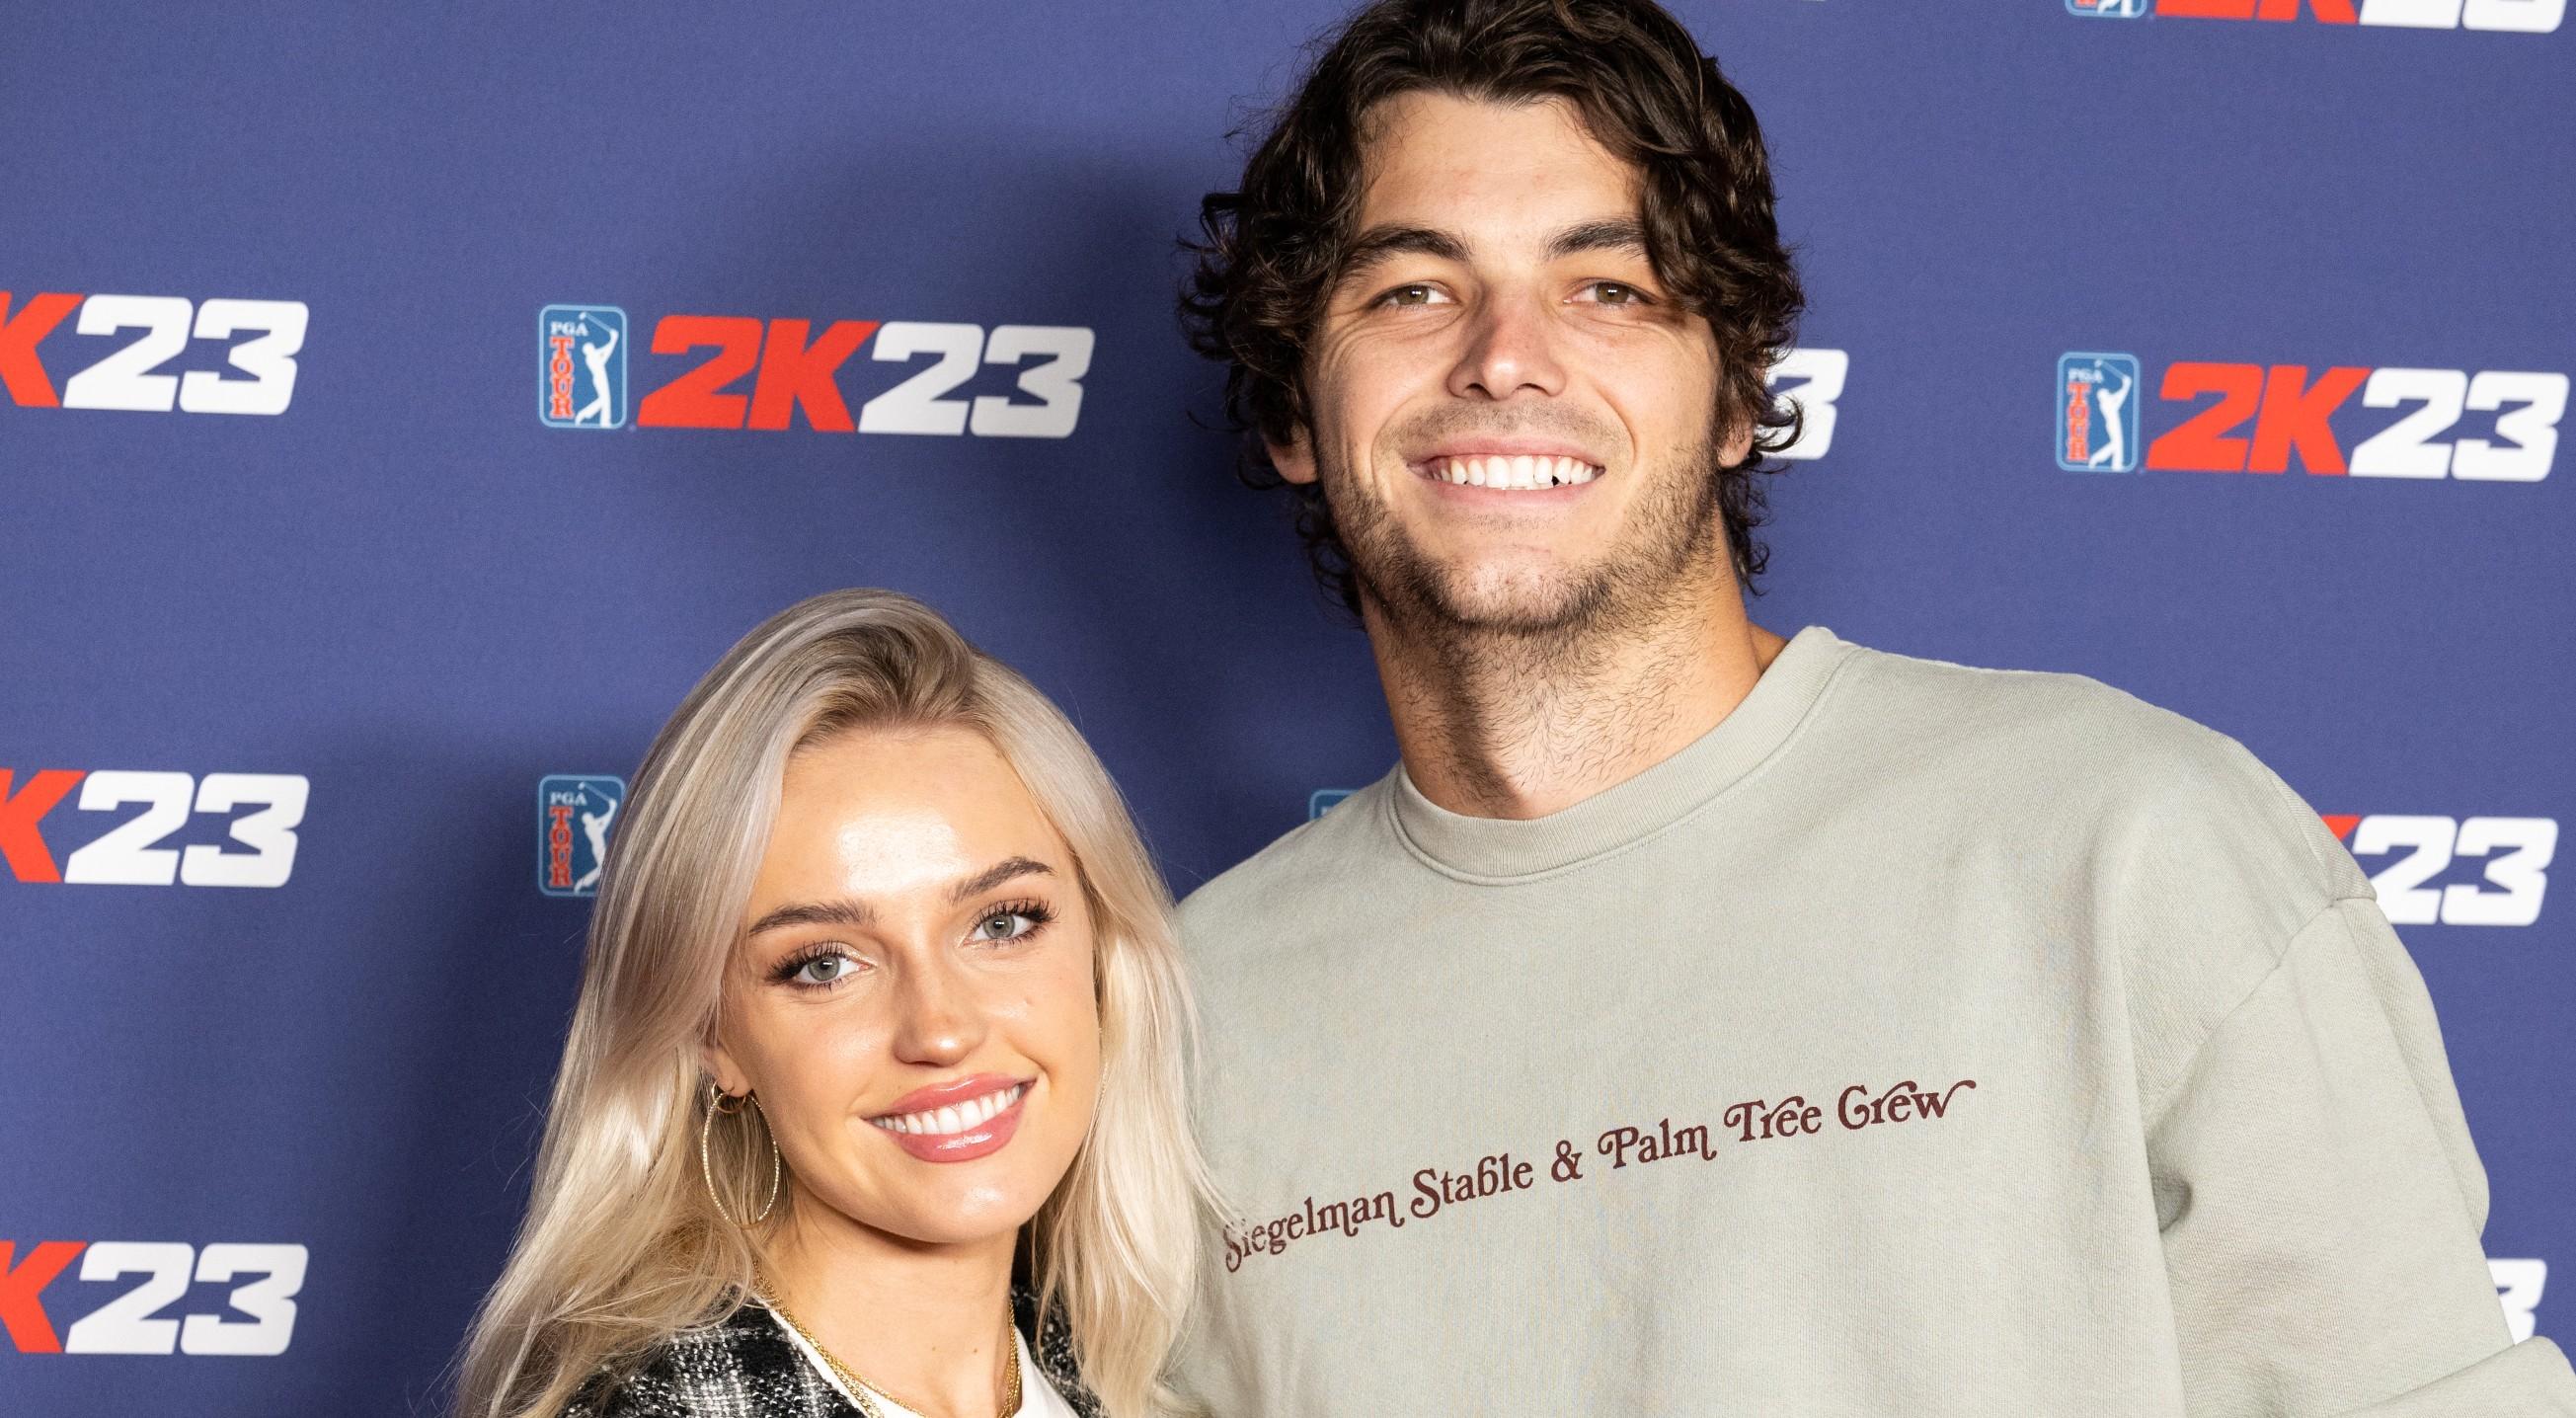 Morgan Riddle and Taylor Riddle at the PGA TOUR 2K23 Launch Event